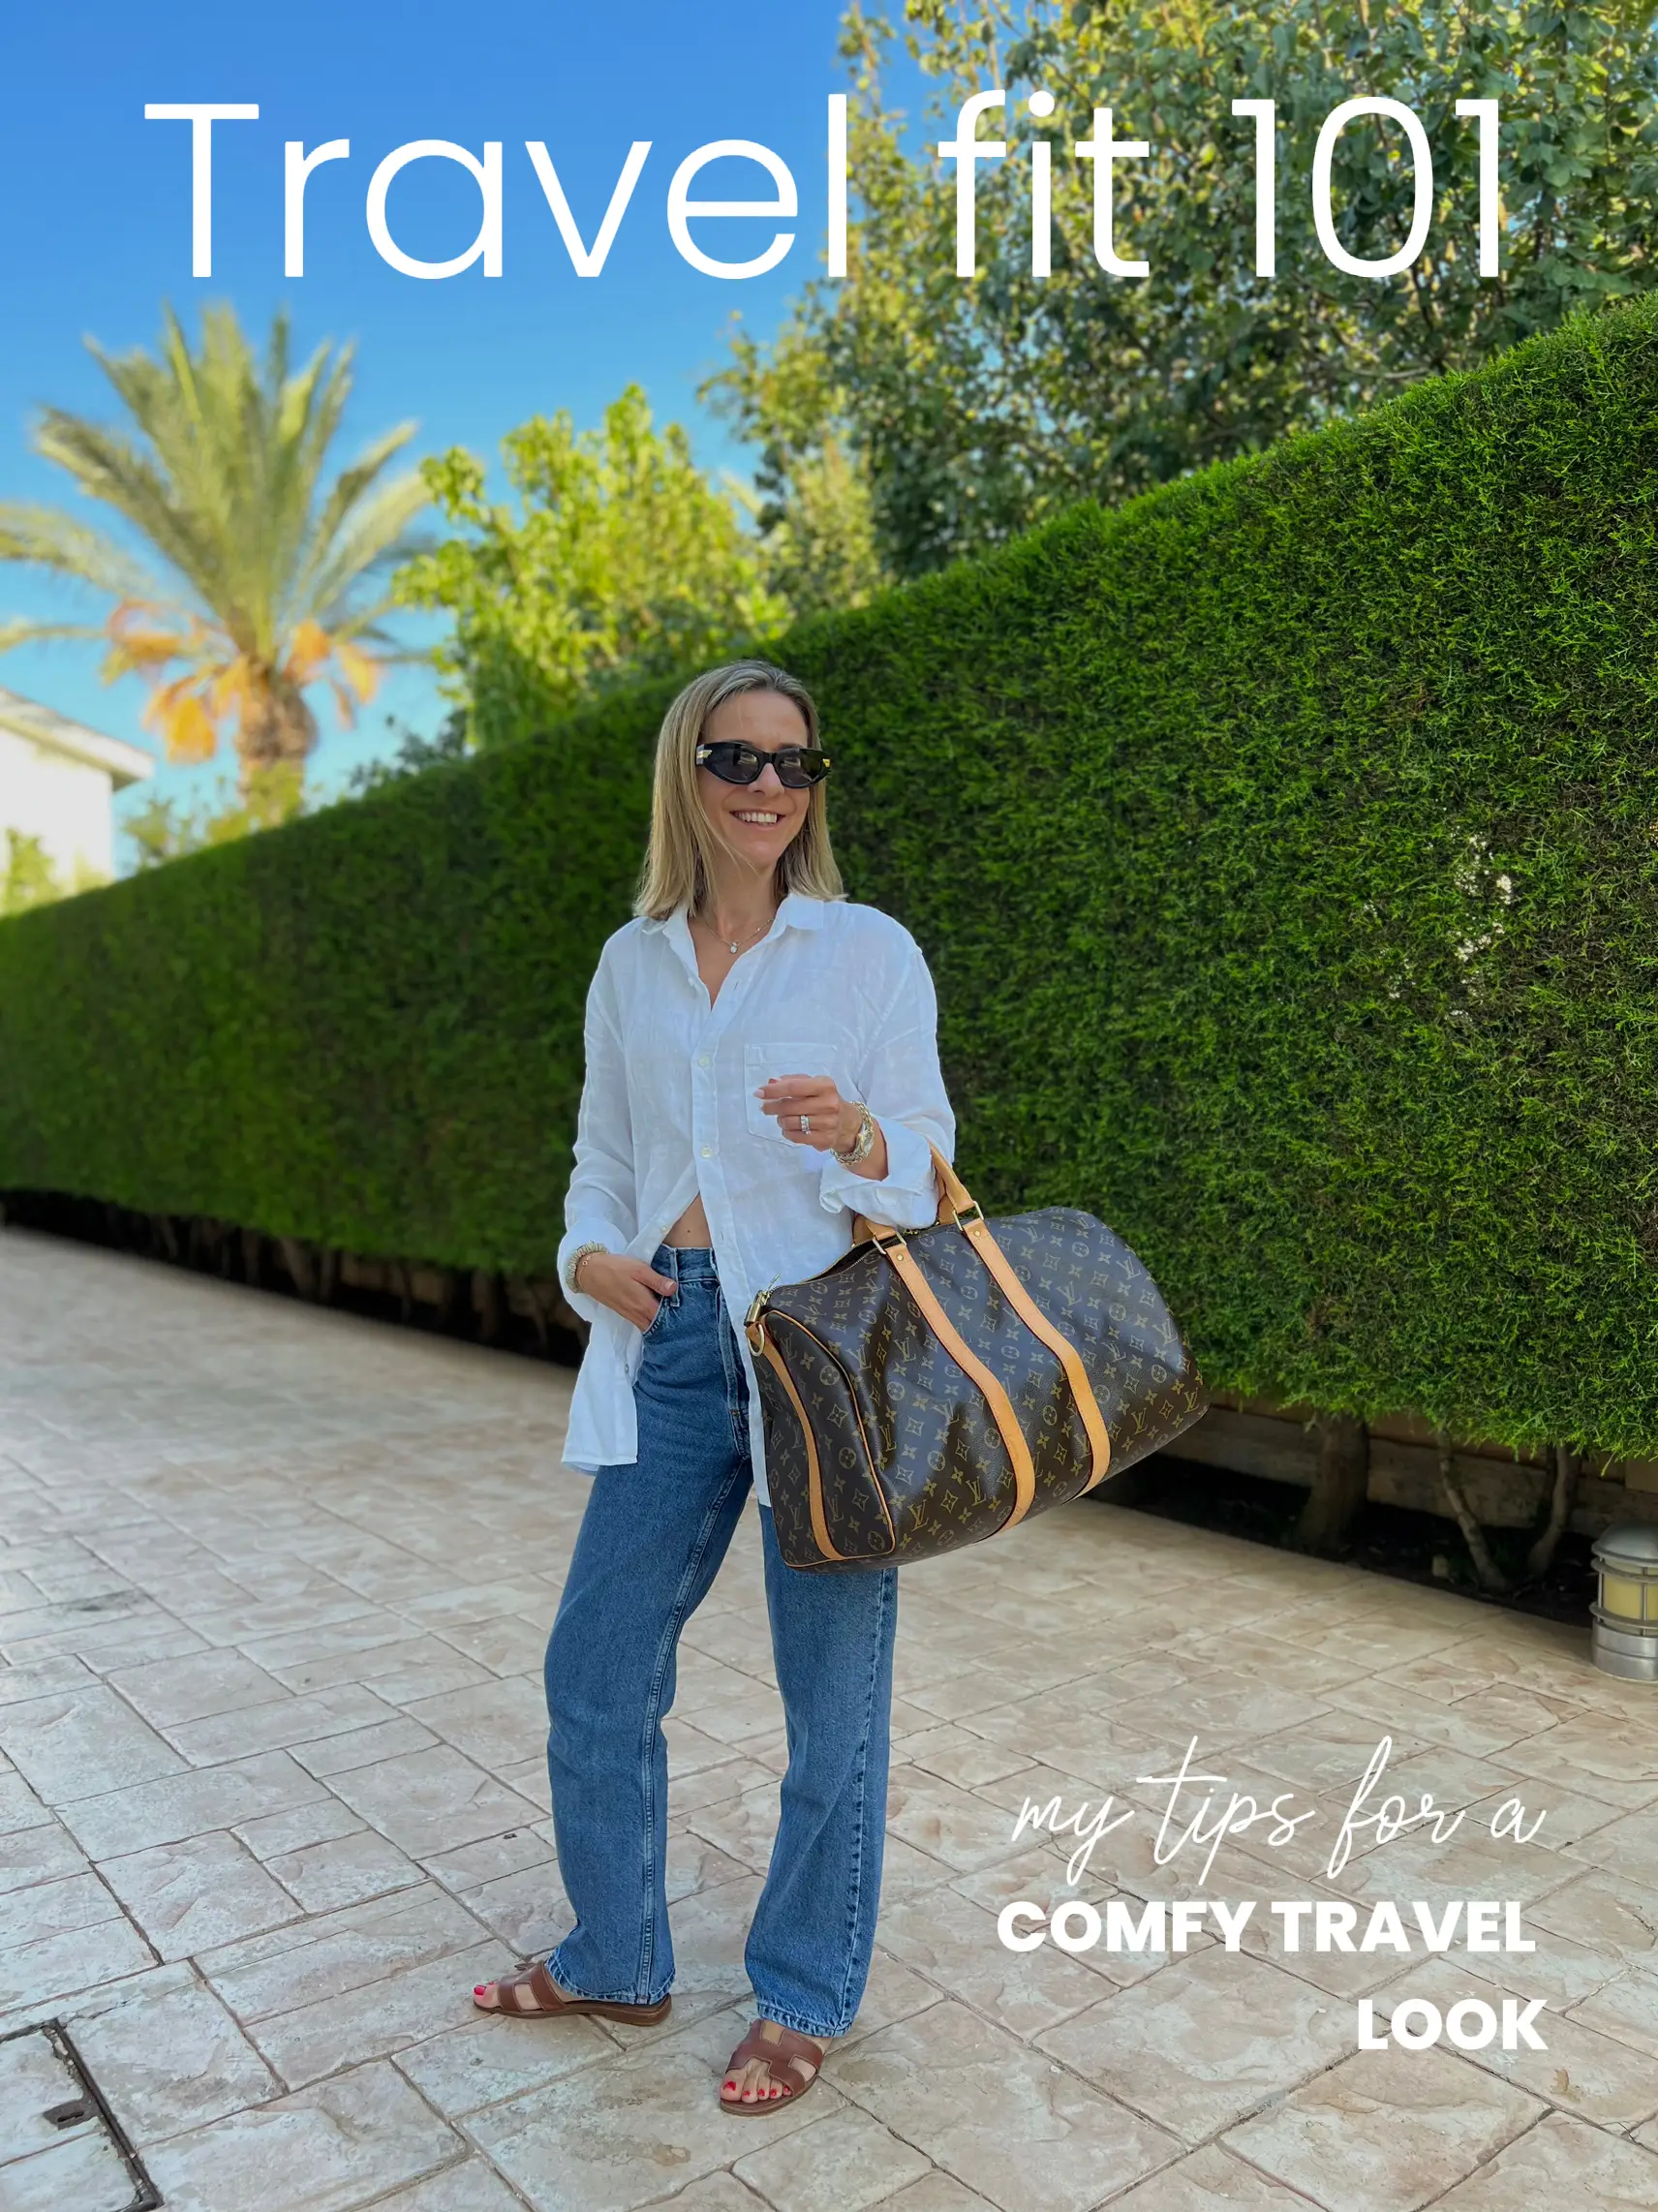 Comfy Travel fit 101, Gallery posted by nicoletta